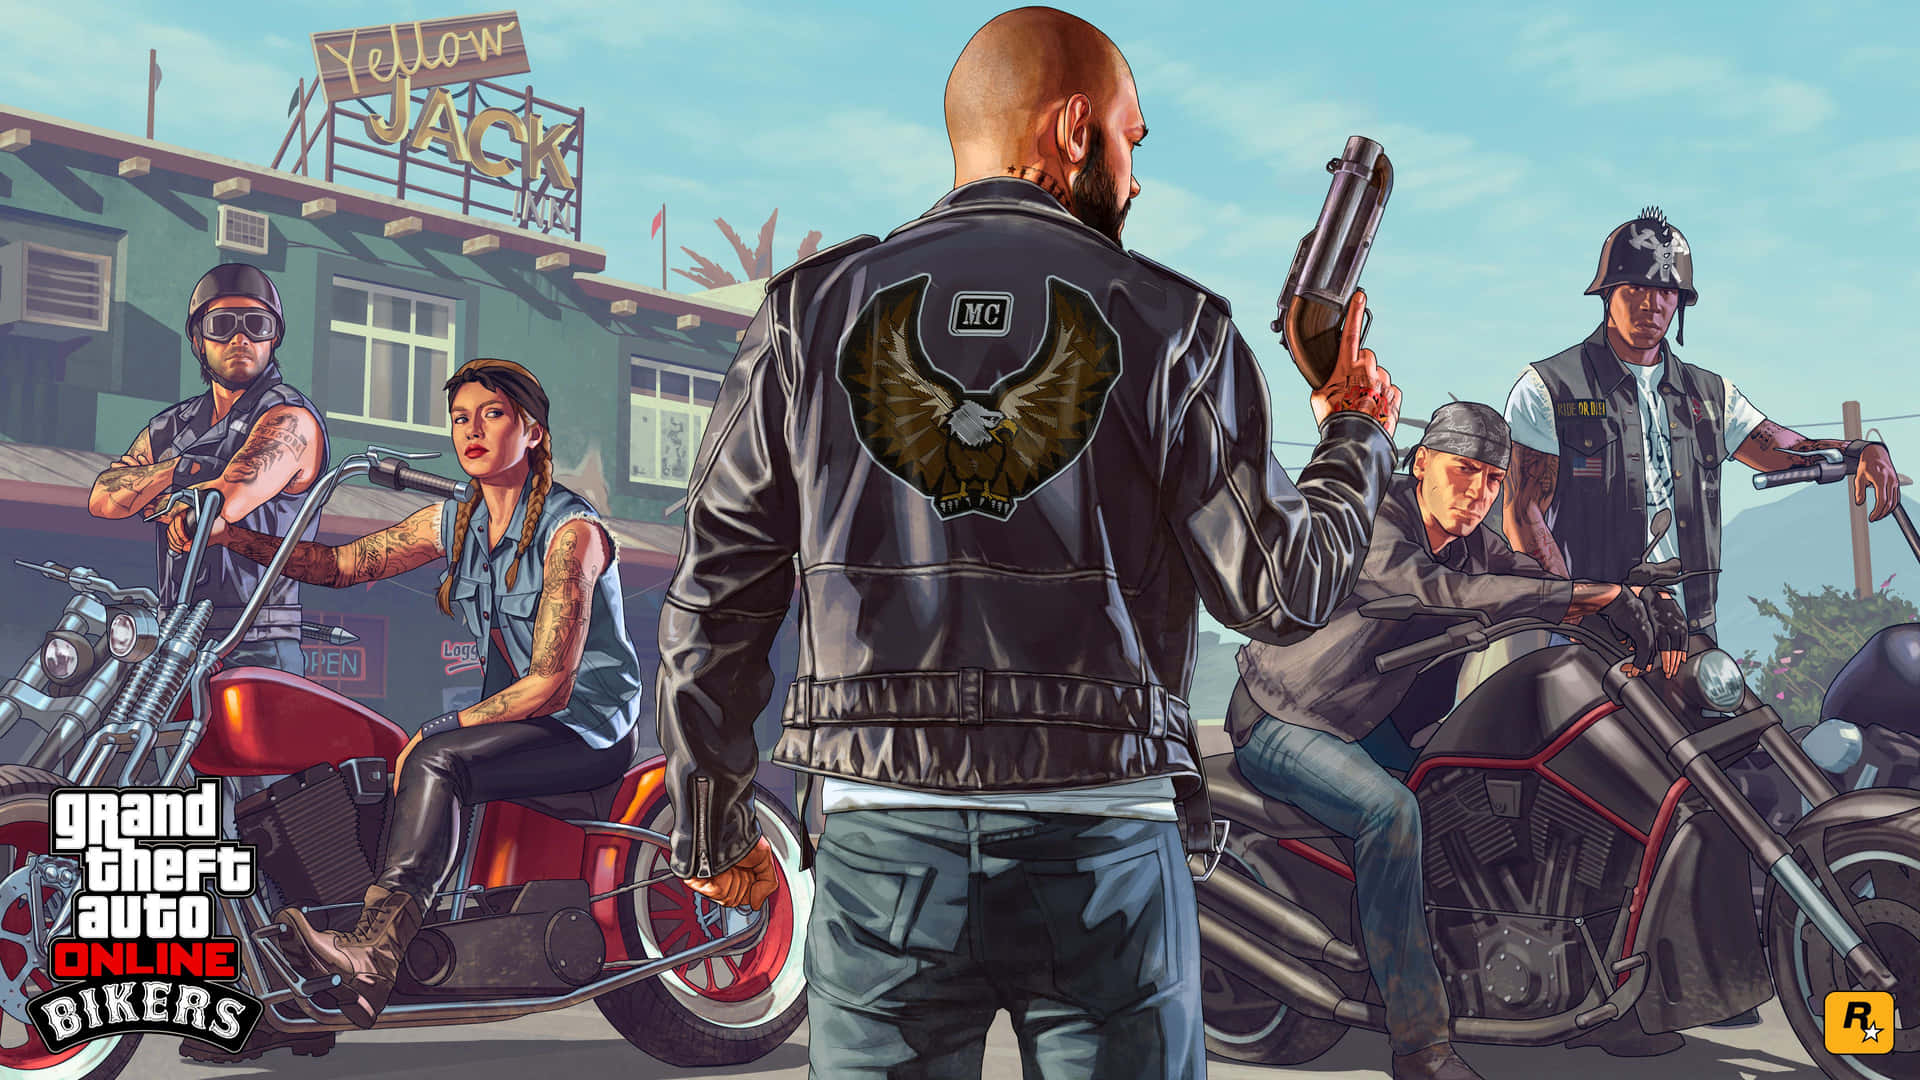 An incredibly exciting and visually stunning Wallpaper featuring GTA 5 Wallpaper